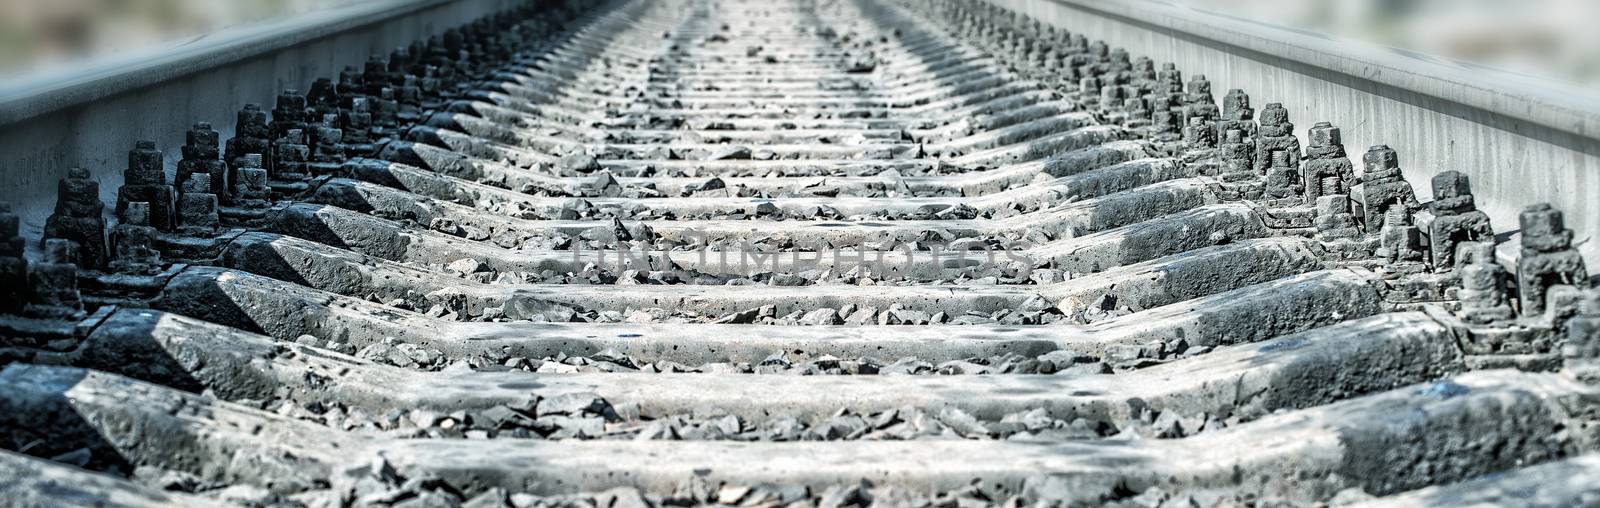 Railway Track by Visual-Content